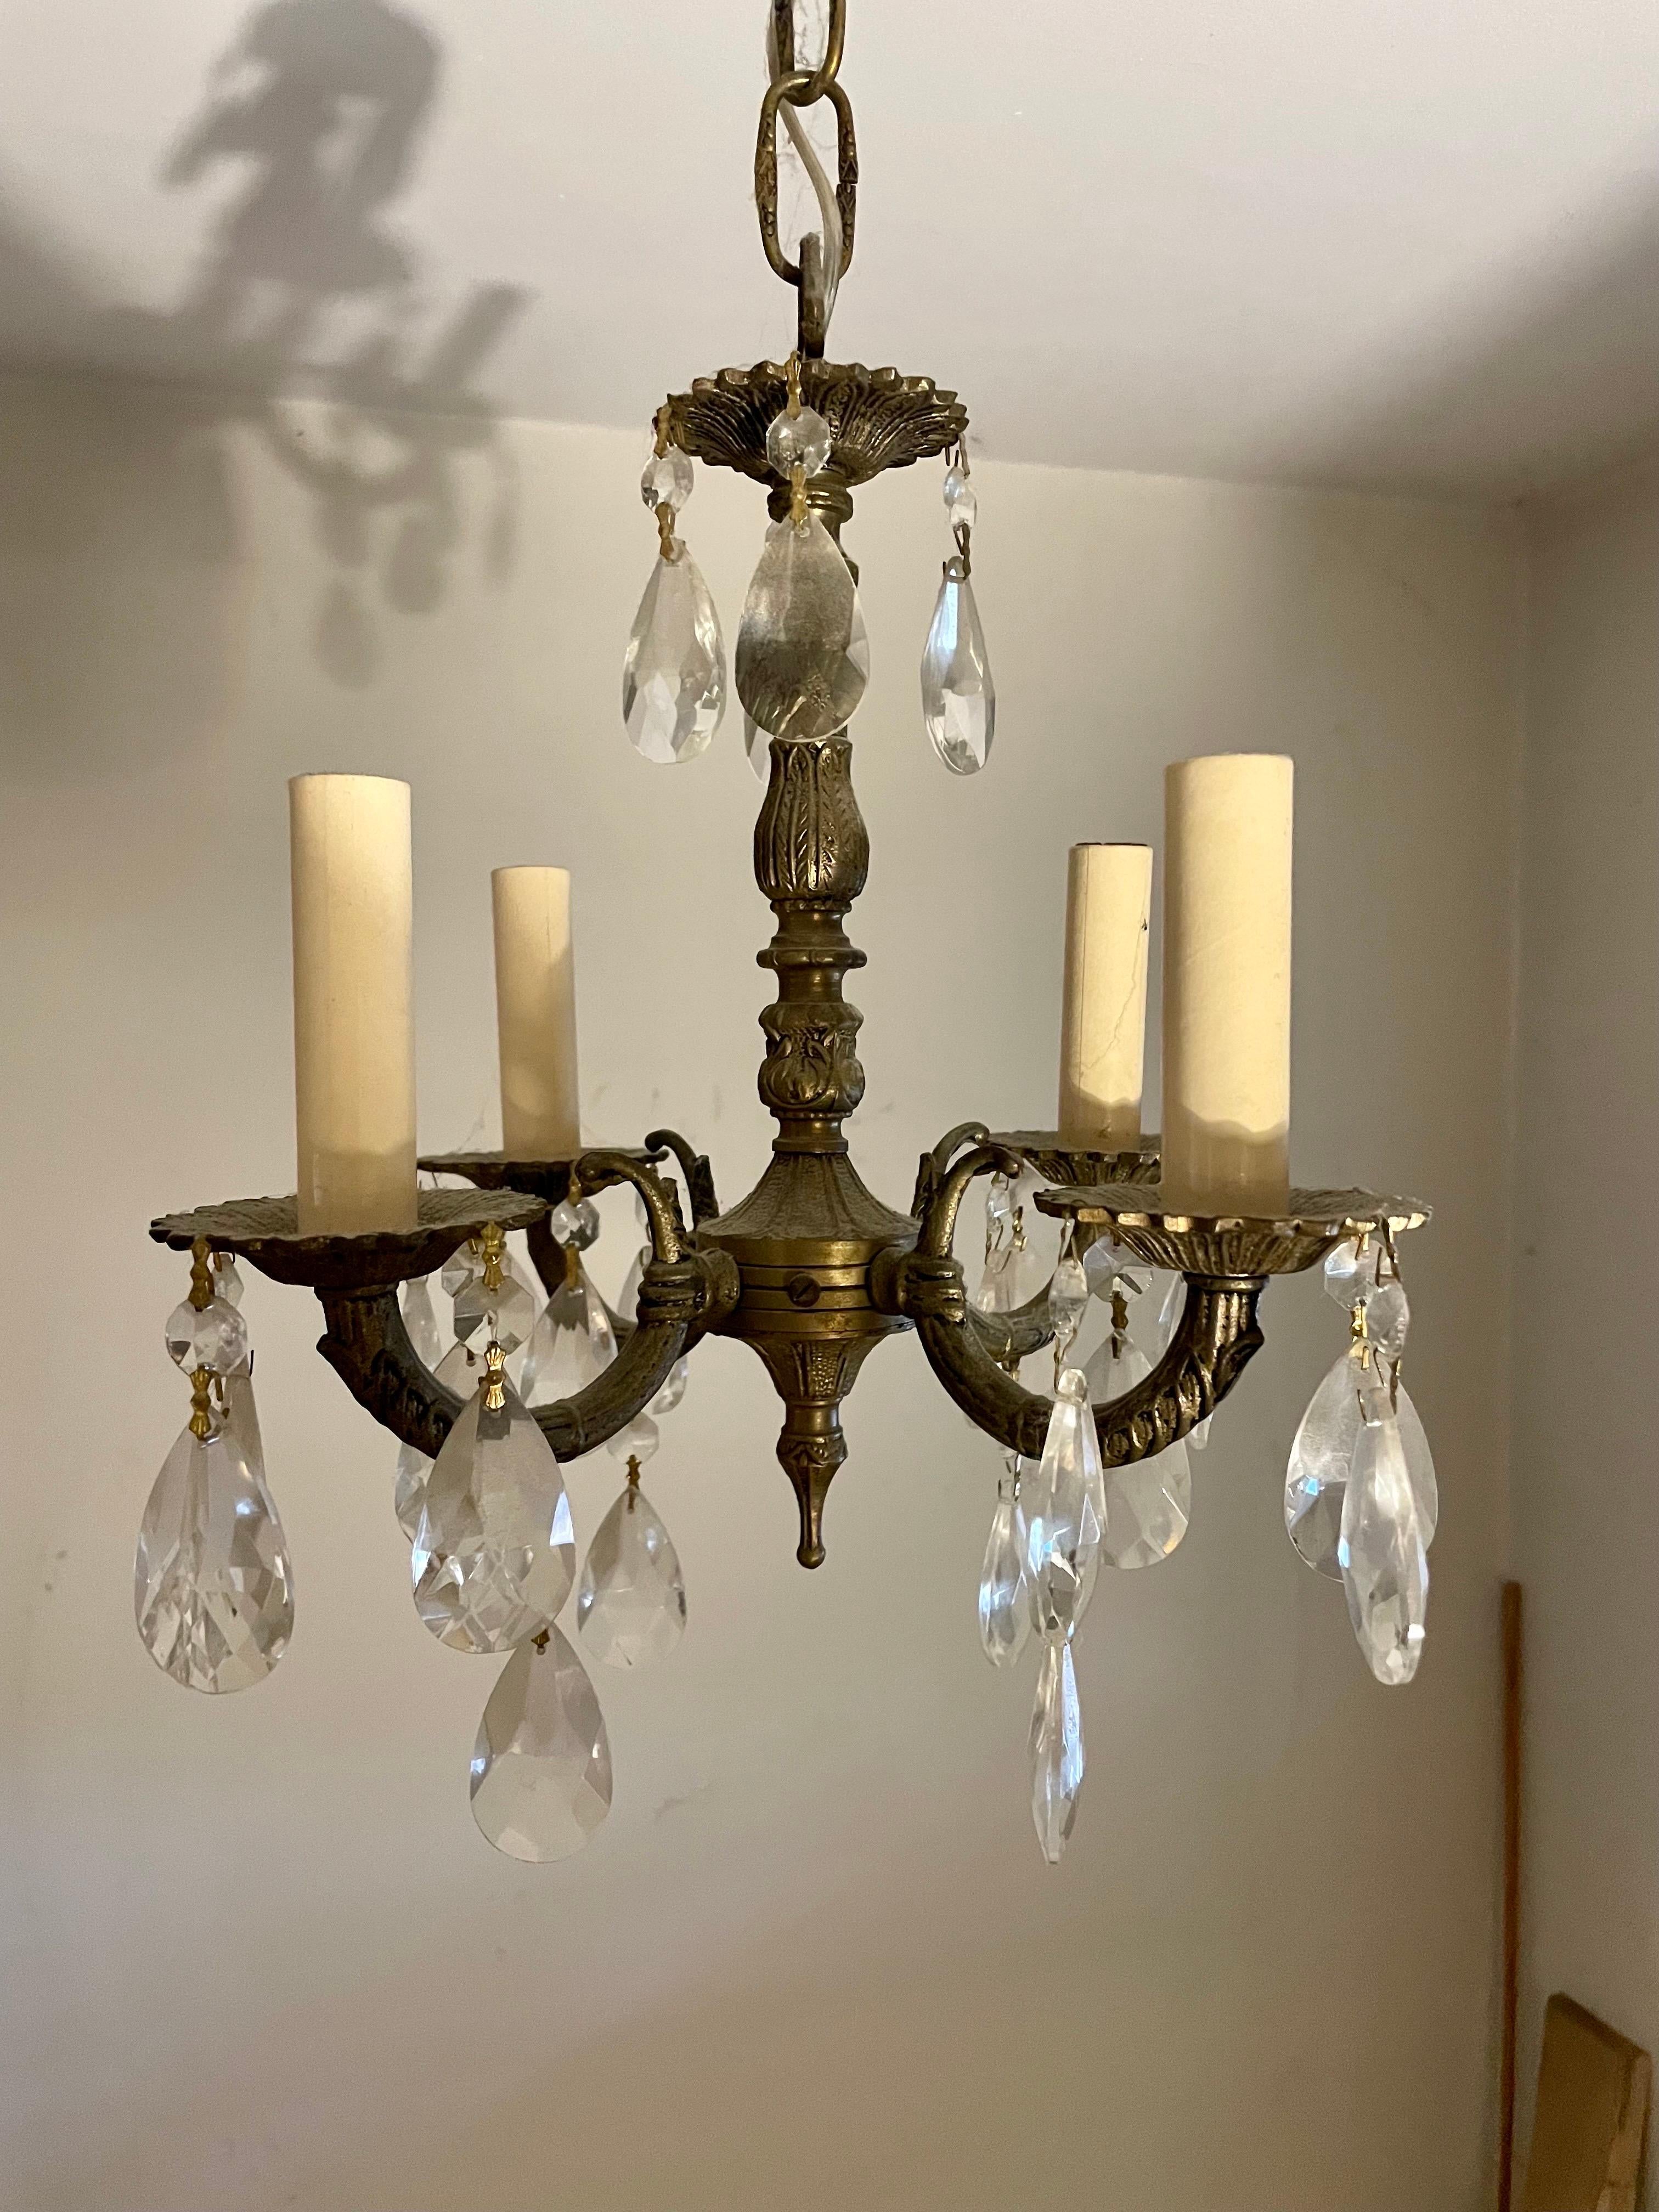 Brass and Crystal French Style Chandelier featuring shimmering crystals mounted on a detailed brass frame. Rewired with clear wire. Four arms with candelabra sockets. Chandelier measures 12